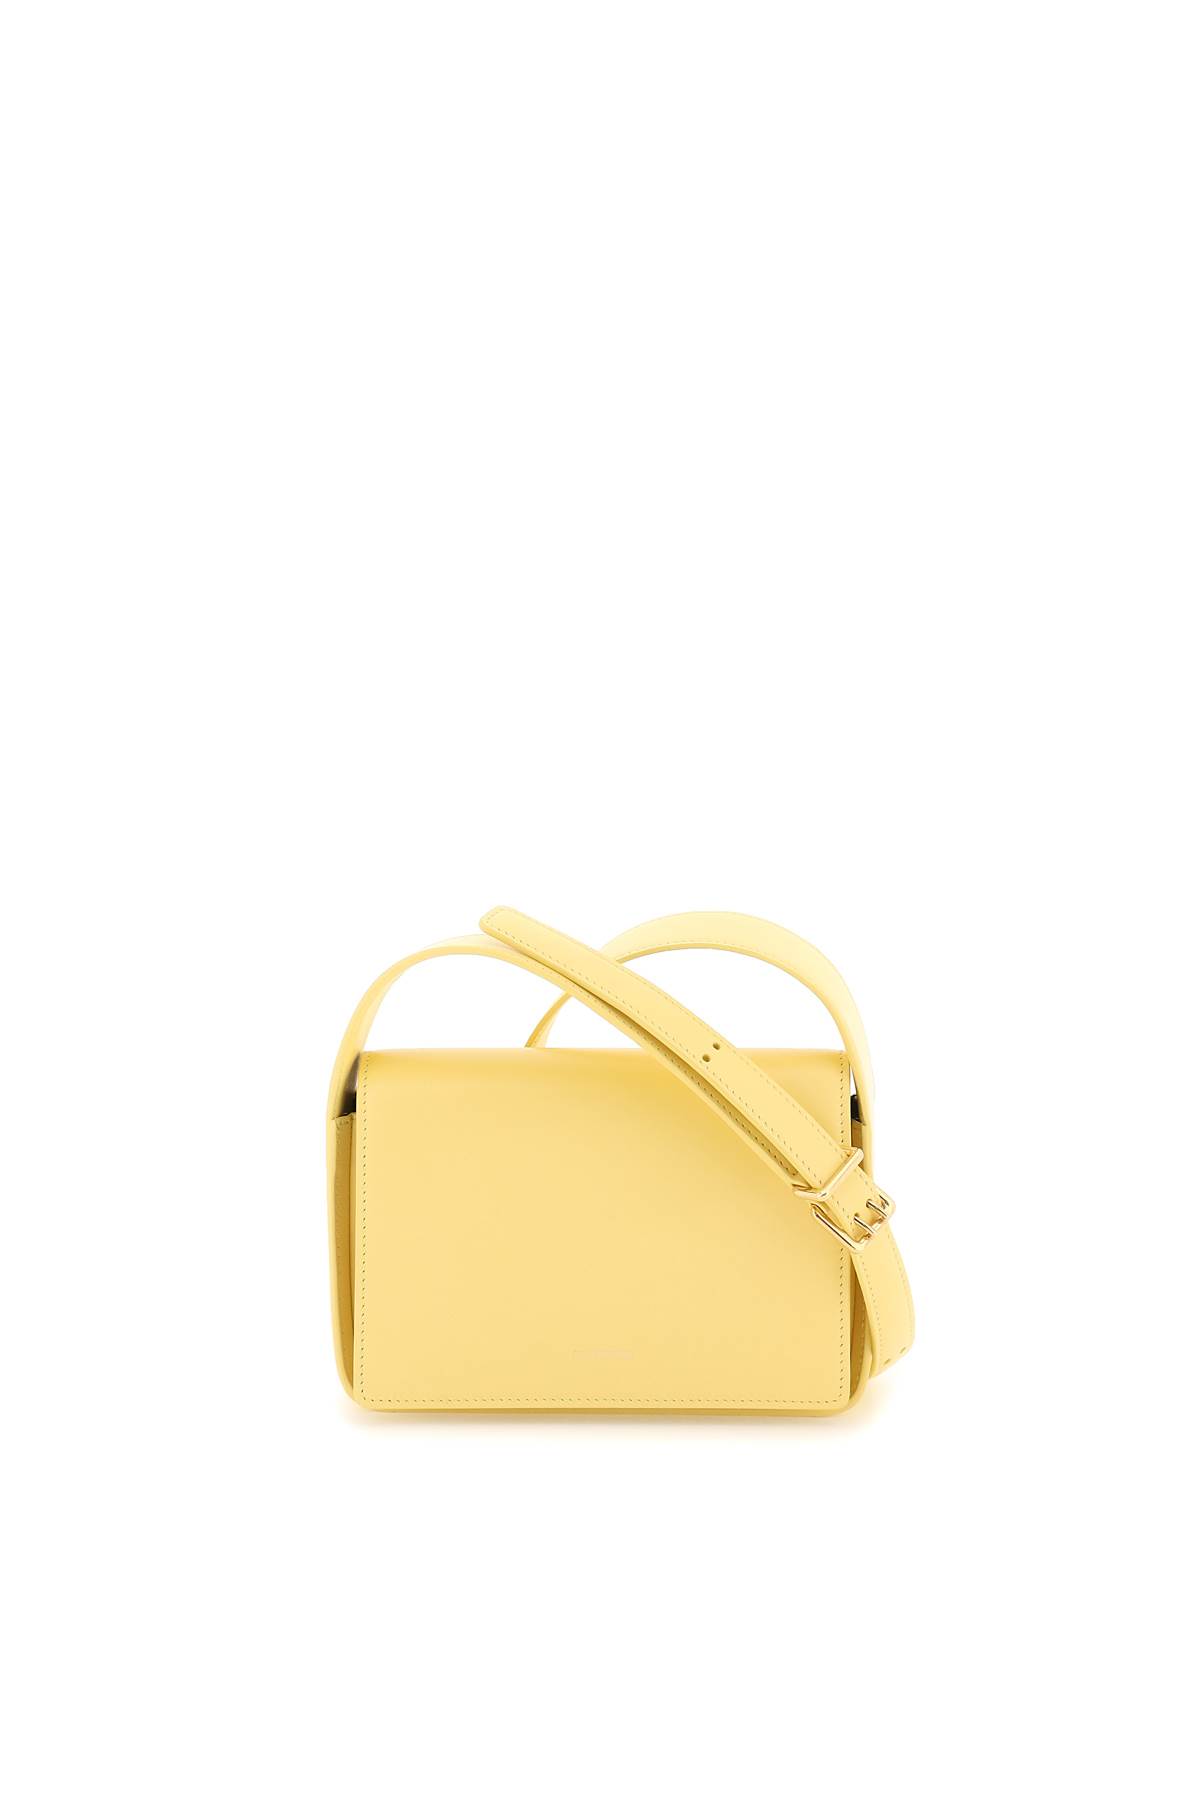 Jil Sander Small Leather Sling Bag In Pastel Yellow (yellow)